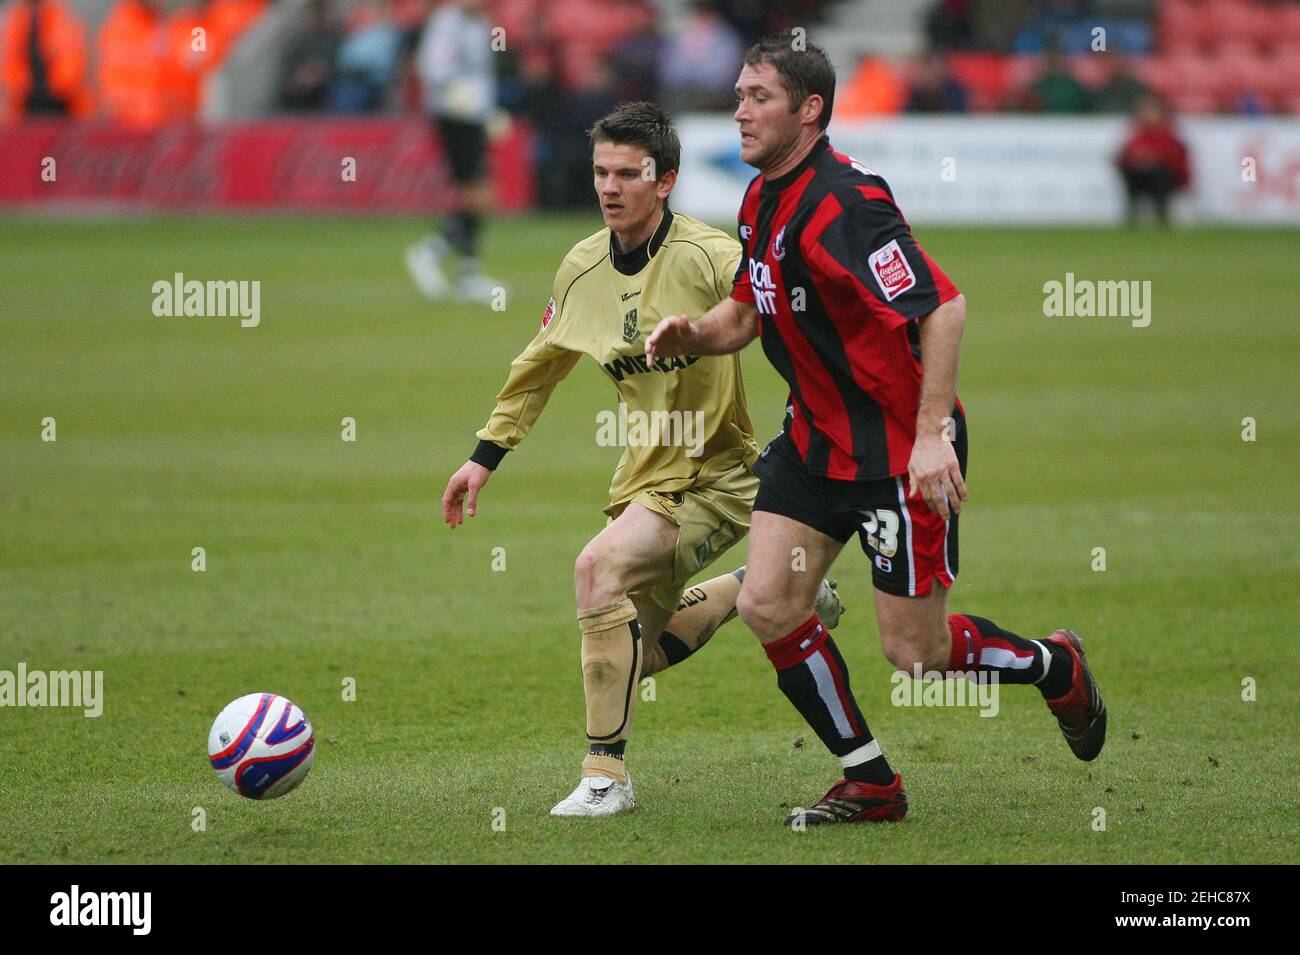 Football - AFC Bournemouth v Tranmere Rovers Coca-Cola Football League One - The Fitness First Stadium at Dean Court - 07/08 - 24/3/08  Shane Sherriff - Tranmere Rovers in action against Lee Bradbury - AFC Bournemouth (R)  Mandatory Credit: Action Images / Lee Mills Stock Photo